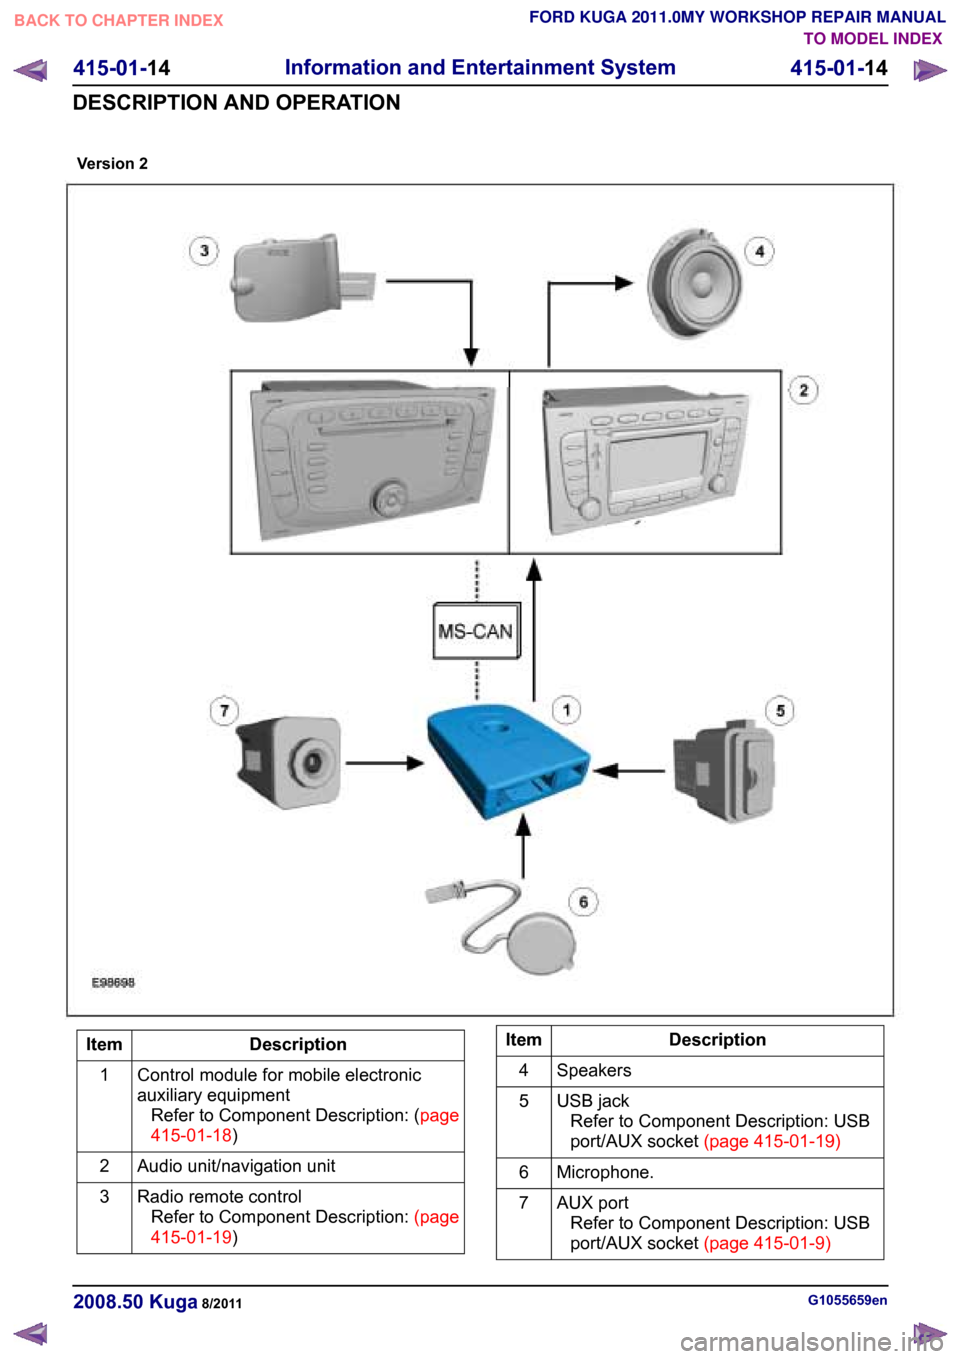 FORD KUGA 2011 1.G User Guide Description
Item
Control module for mobile electronic
auxiliary equipmentRefertoComponentDescription:(page
415-01-18)
1
Audio unit/navigation unit
2
Radio remote controlRefertoComponentDescription:(pa